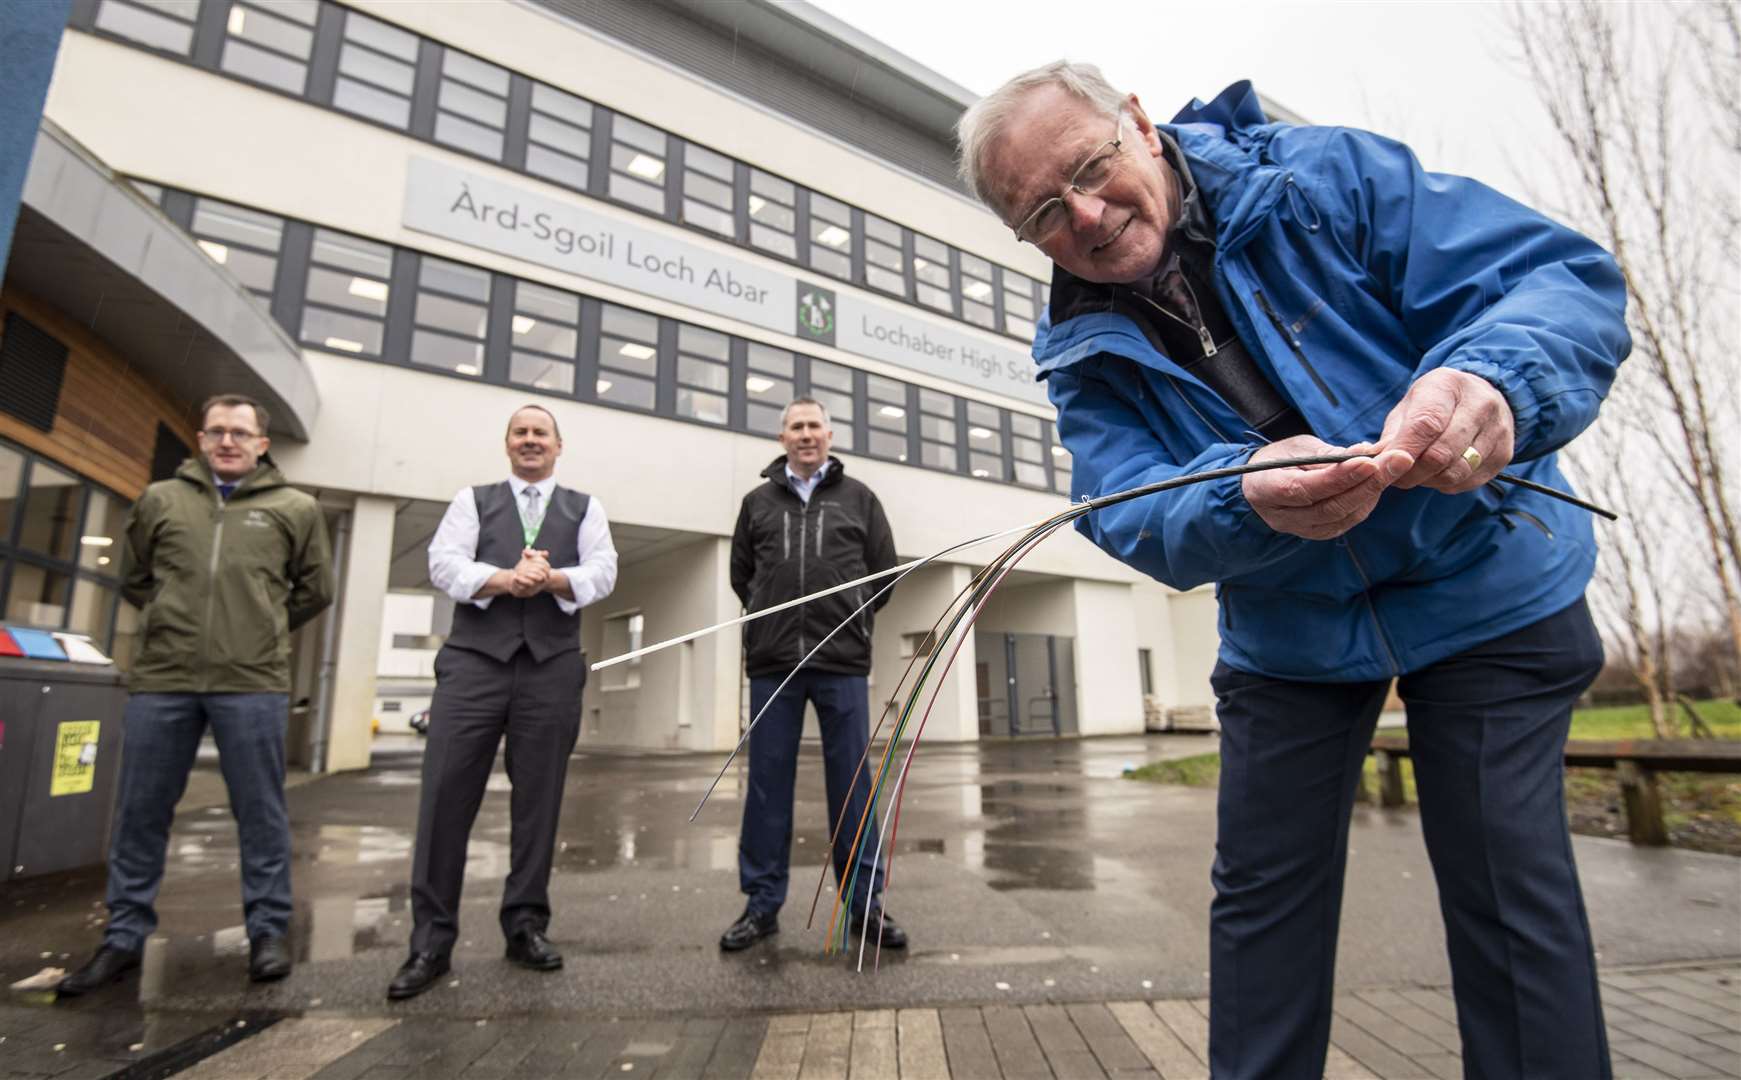 Allan Henderson (right) with from left Michael Kelly, UK Government’s Department of Culture, Media and Sport, Lochaber High School Head Teacher Scott Steele and HIE’s Scott Dingwall